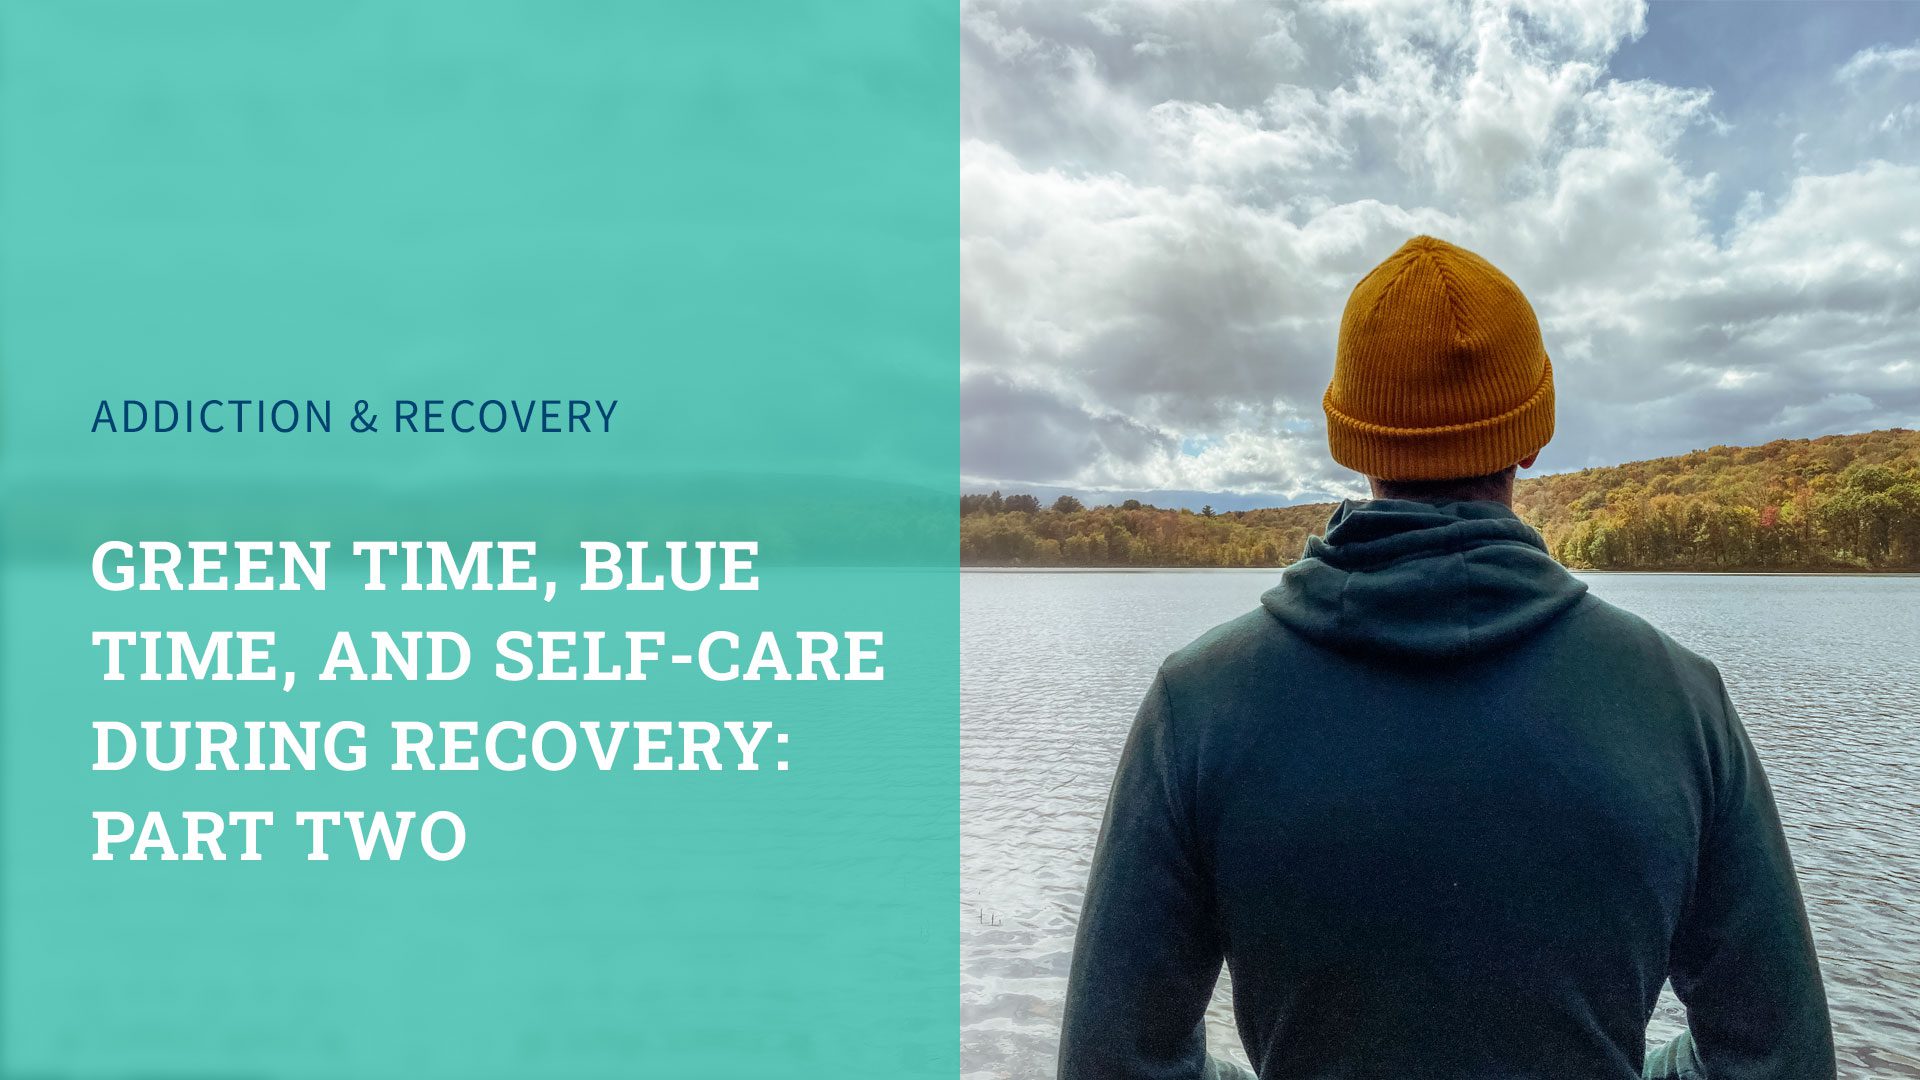 Green Time, Blue Time, and Self-Care During Recovery: Part Two